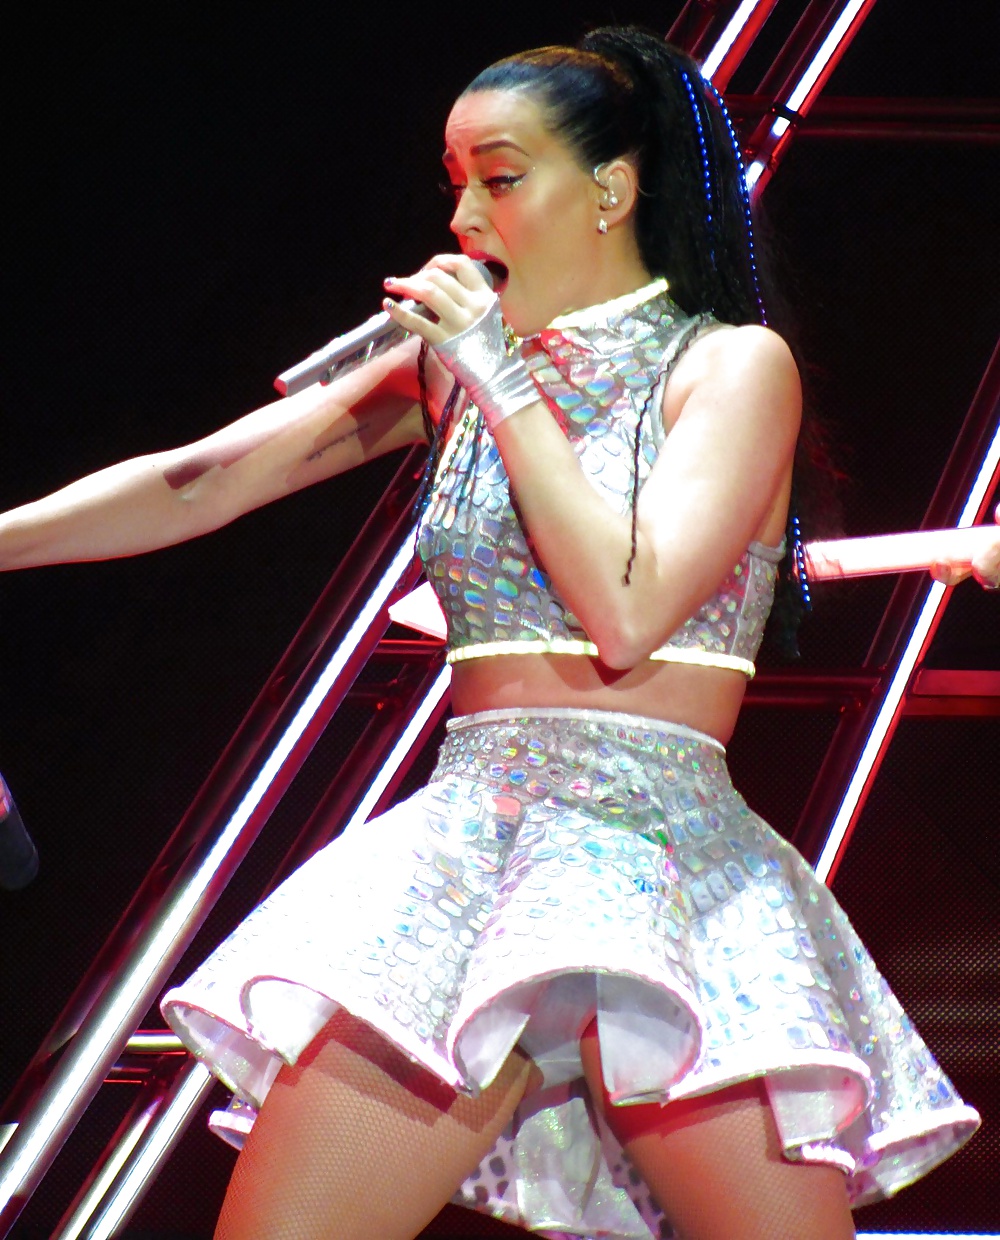 Katy perry tette, culo, colpi crotch
 #26378147